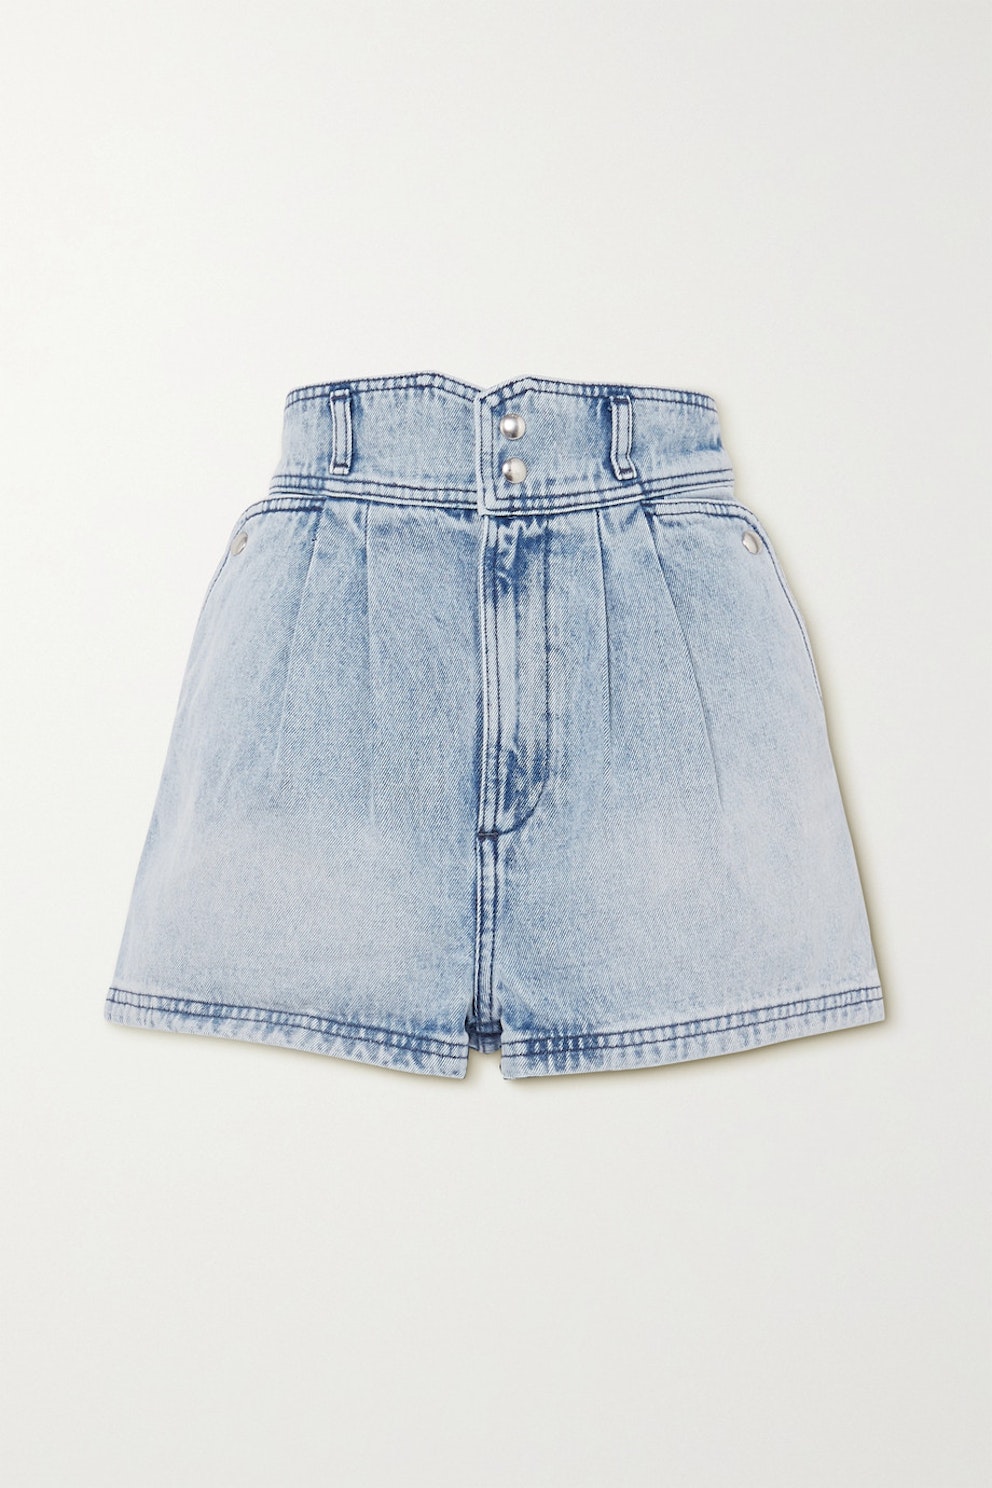 Denim Shorts: The Grown-Up Guide To Wearing Jean Shorts